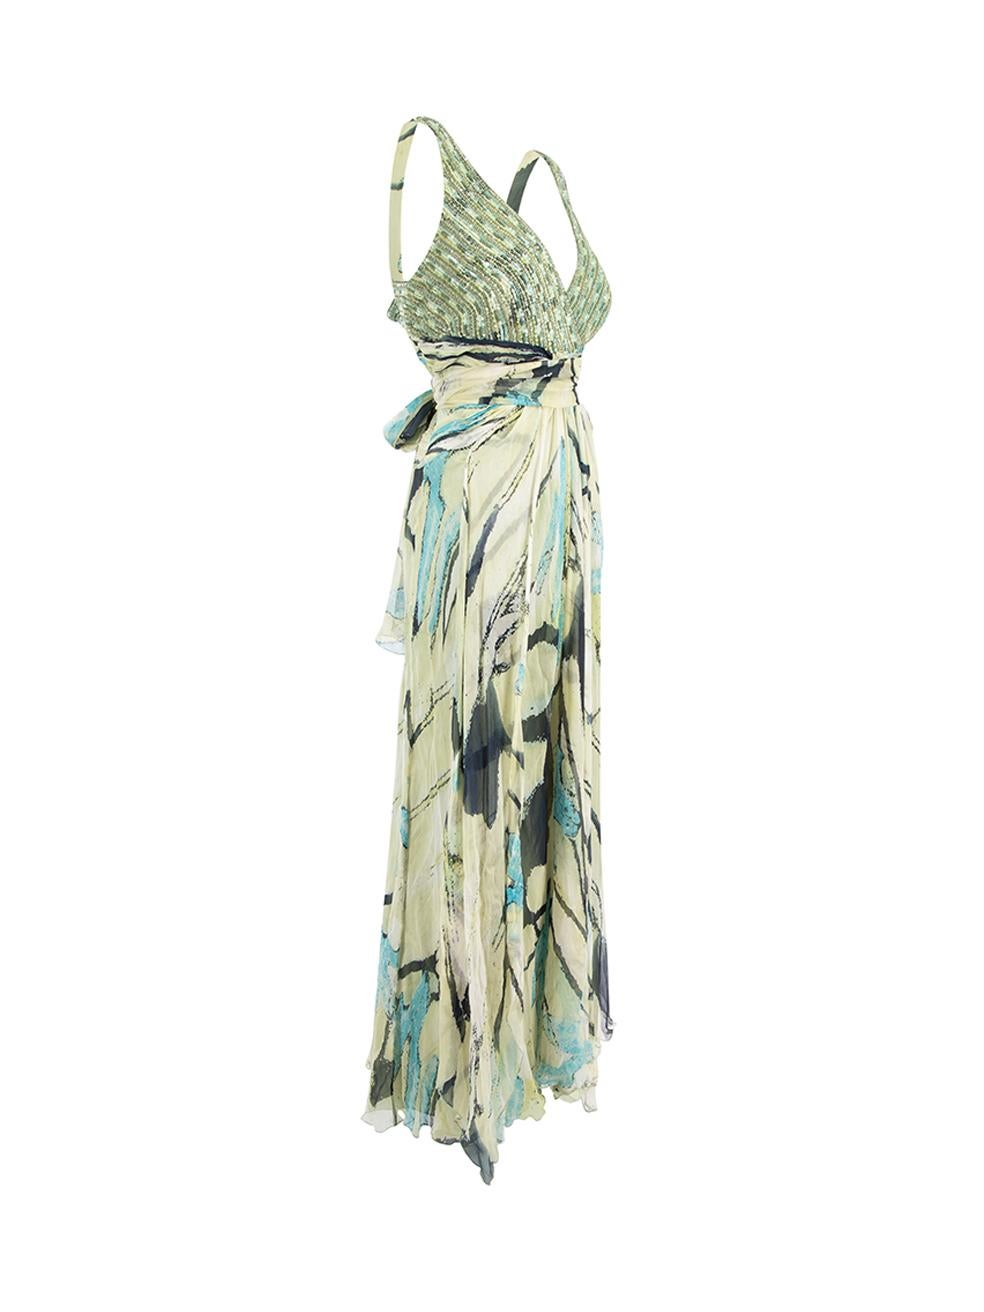 CONDITION is Very good. Minimal wear to dress is evident. Loose threads and a couple of missing beads near the left shoulder as well as fraying to hemline on this used Terani Couture designer resale item.   Details  Green Silk Maxi gown Abstract